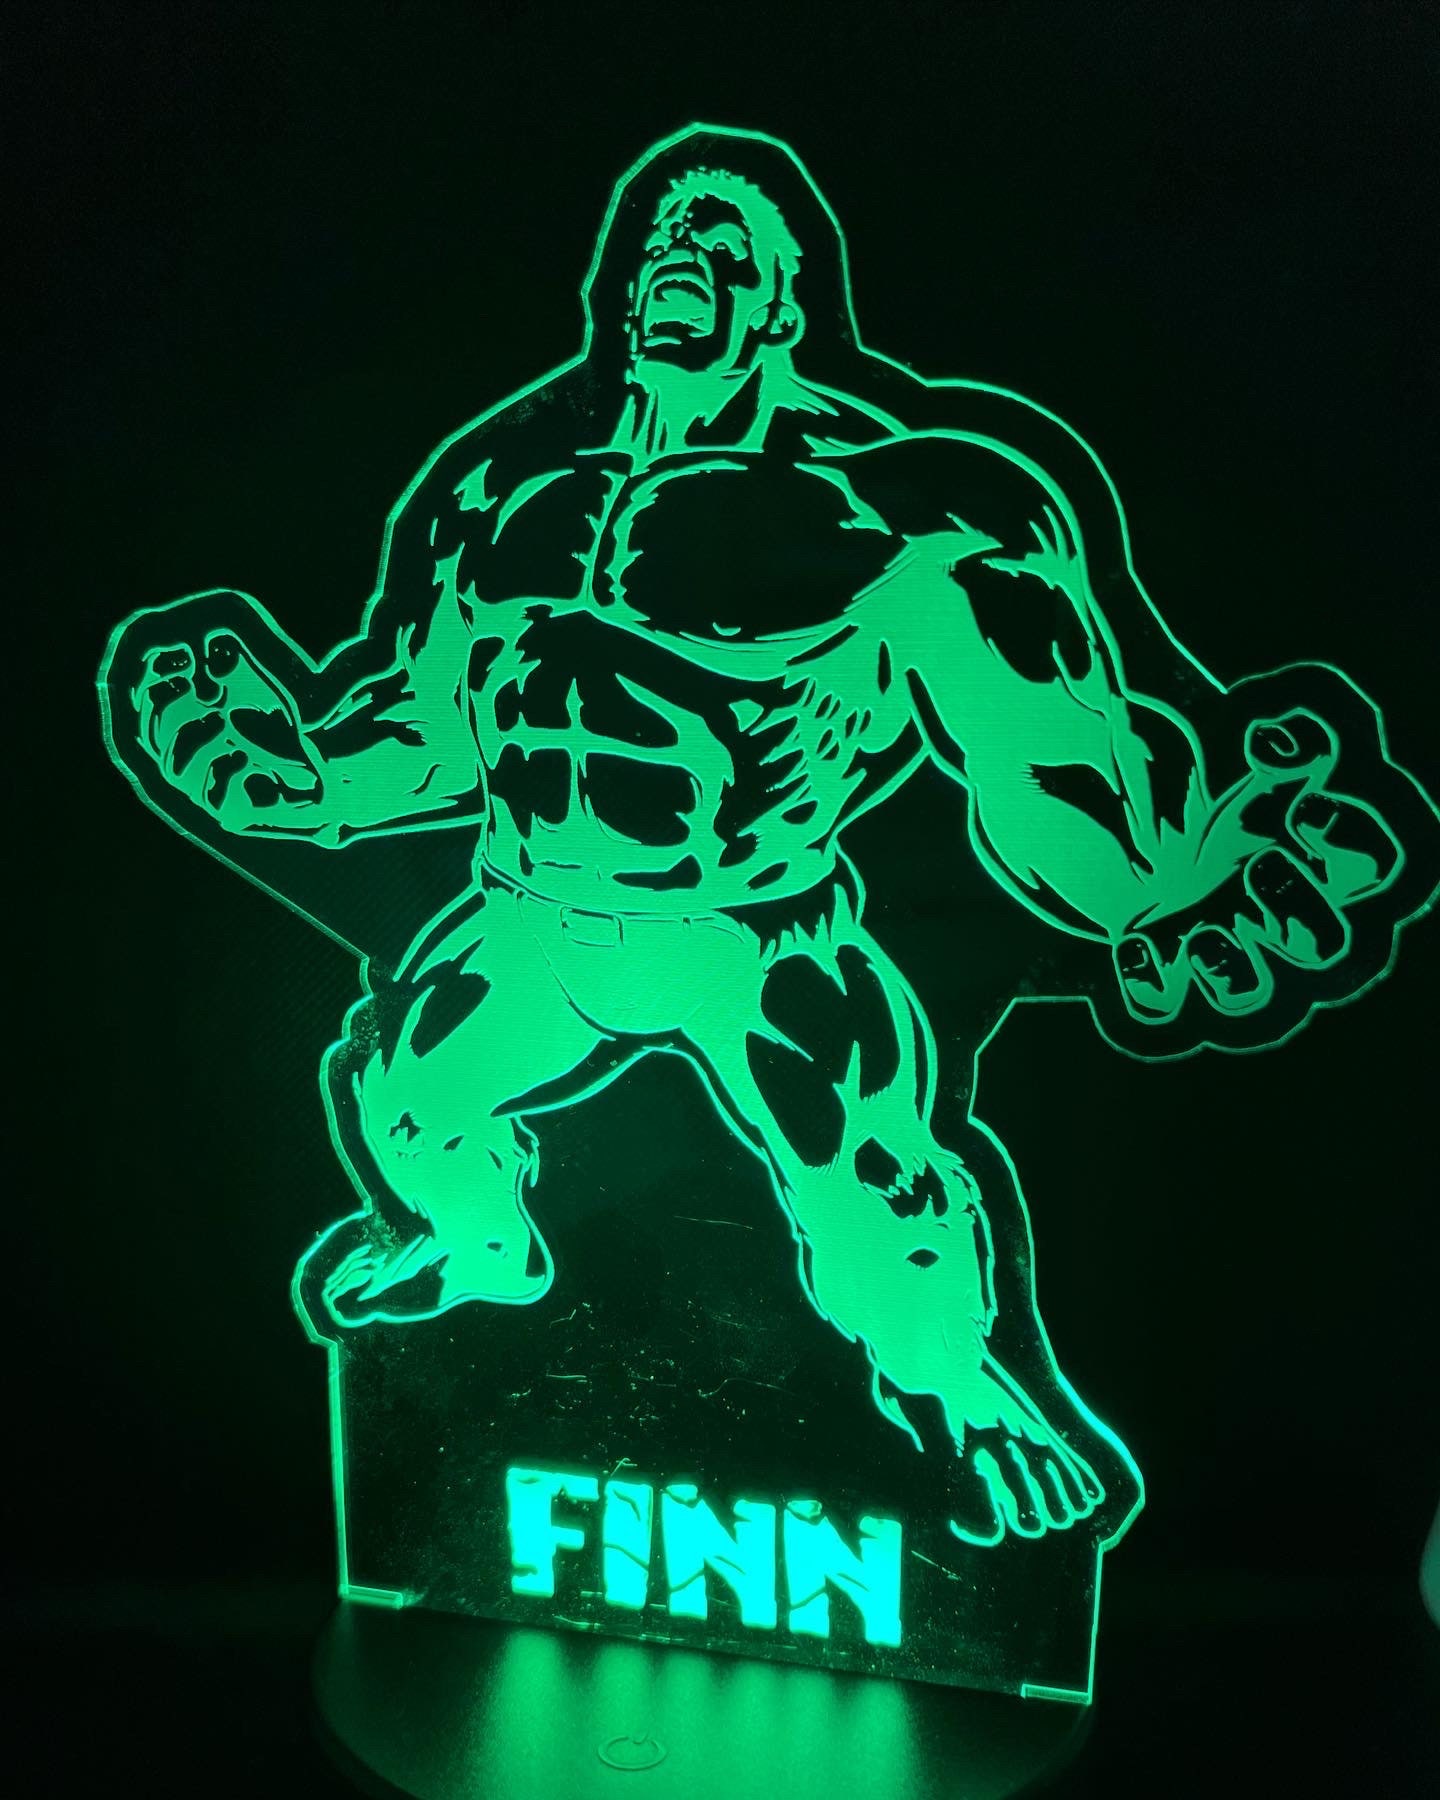 Hulk 2 3D LED LAMP with a base of your choice! - PictyourLamp